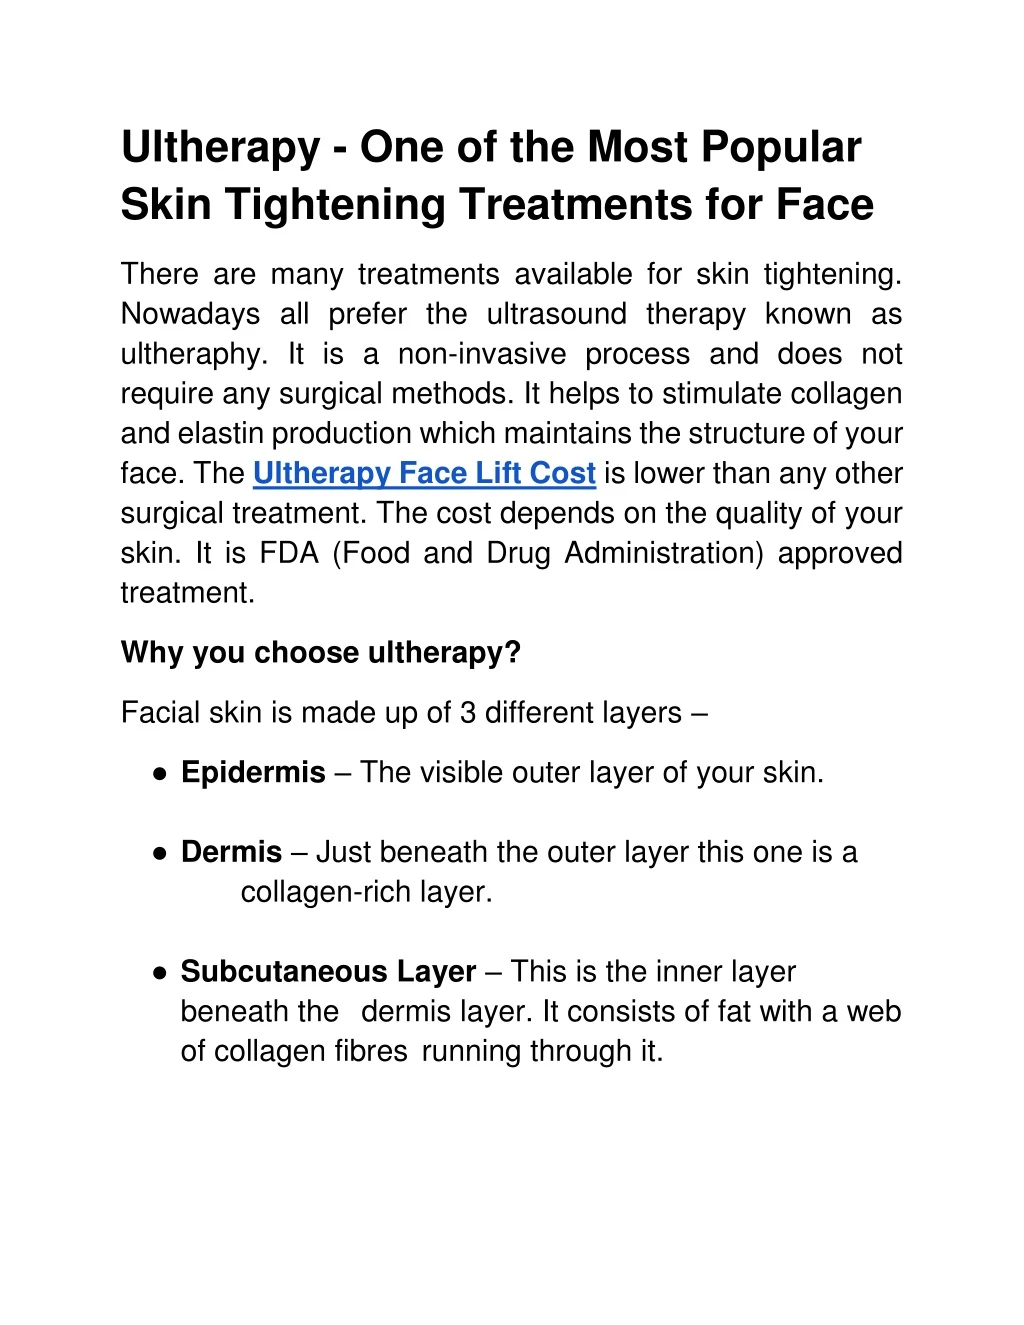 ultherapy one of the most popular skin tightening